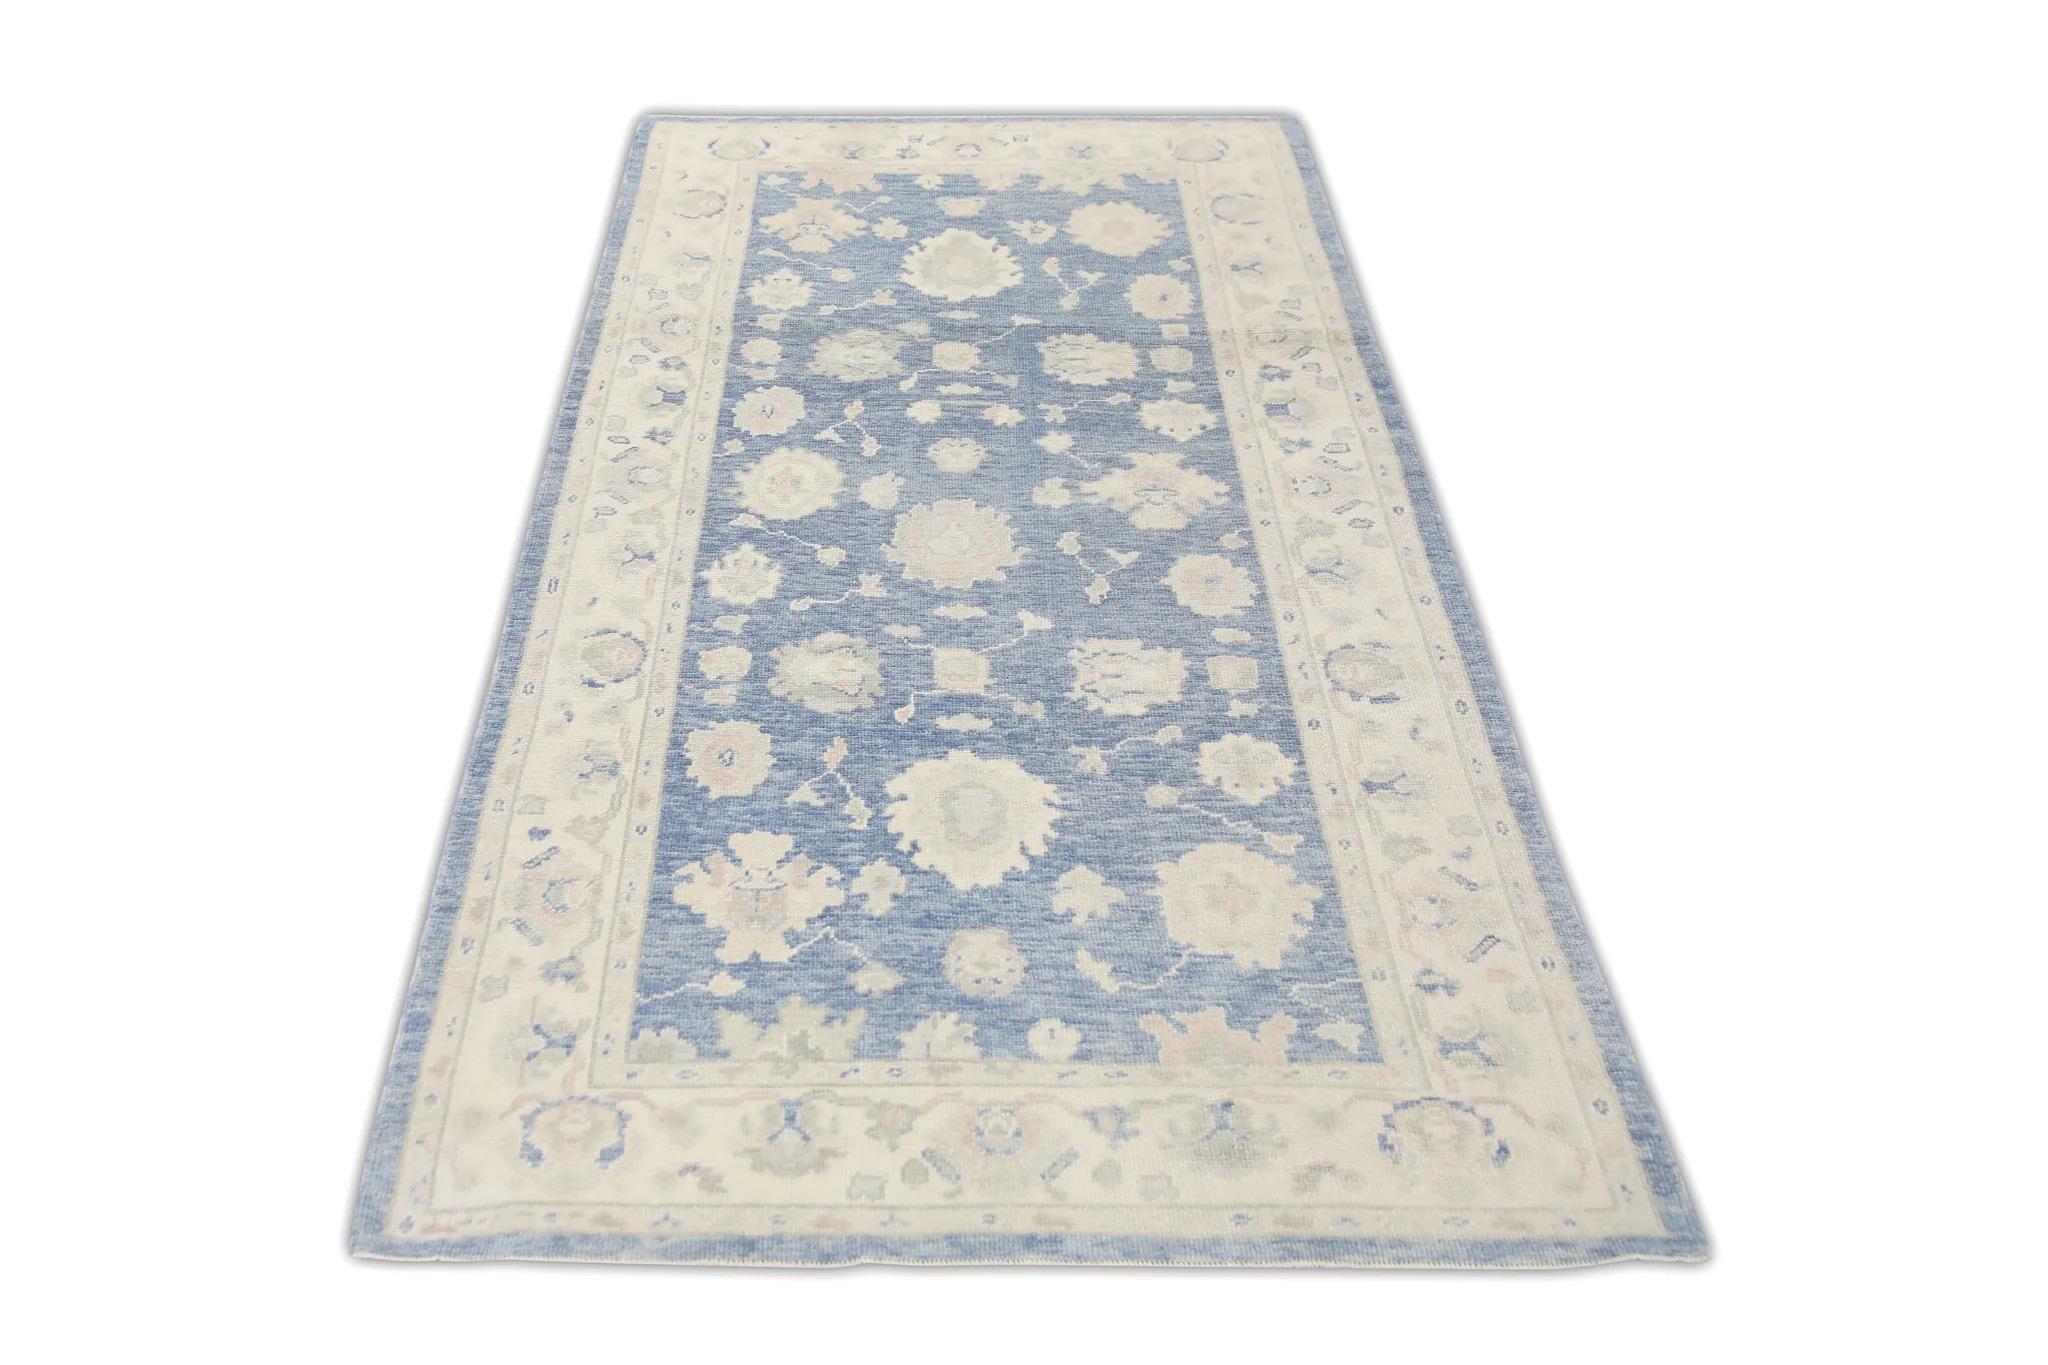 Contemporary Blue Handwoven Wool Turkish Oushak Rug in Floral Design 5'1